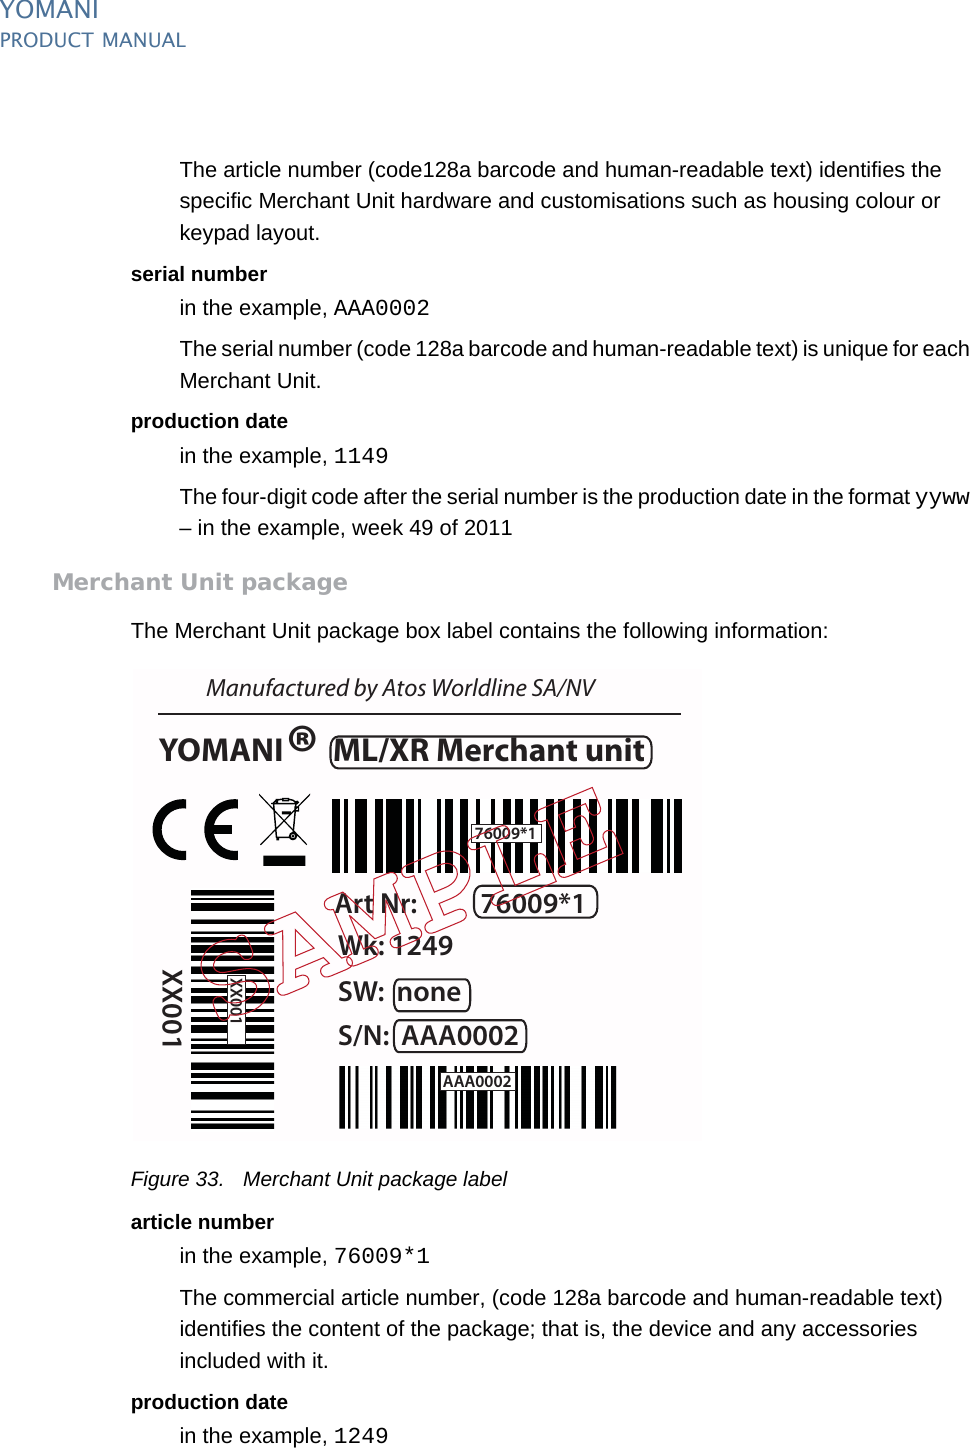 YOMANIPRODUCT MANUAL38  PUBLIClast updated 8/11/13 document release 2.1 pm_ymn_logistics.fmThe article number (code128a barcode and human-readable text) identifies the specific Merchant Unit hardware and customisations such as housing colour or keypad layout.serial numberin the example, AAA0002The serial number (code 128a barcode and human-readable text) is unique for each Merchant Unit.production datein the example, 1149The four-digit code after the serial number is the production date in the format yyww – in the example, week 49 of 2011Merchant Unit packageThe Merchant Unit package box label contains the following information:Figure 33. Merchant Unit package labelarticle numberin the example, 76009*1The commercial article number, (code 128a barcode and human-readable text) identifies the content of the package; that is, the device and any accessories included with it.production datein the example, 1249YOMANI  ML/XR Merchant unitManufactured by Atos Worldline SA/NVArt Nr: 76009*1S/N: AAA0002Wk: 1249XX001SW:  none®76009*1XX001AAA0002